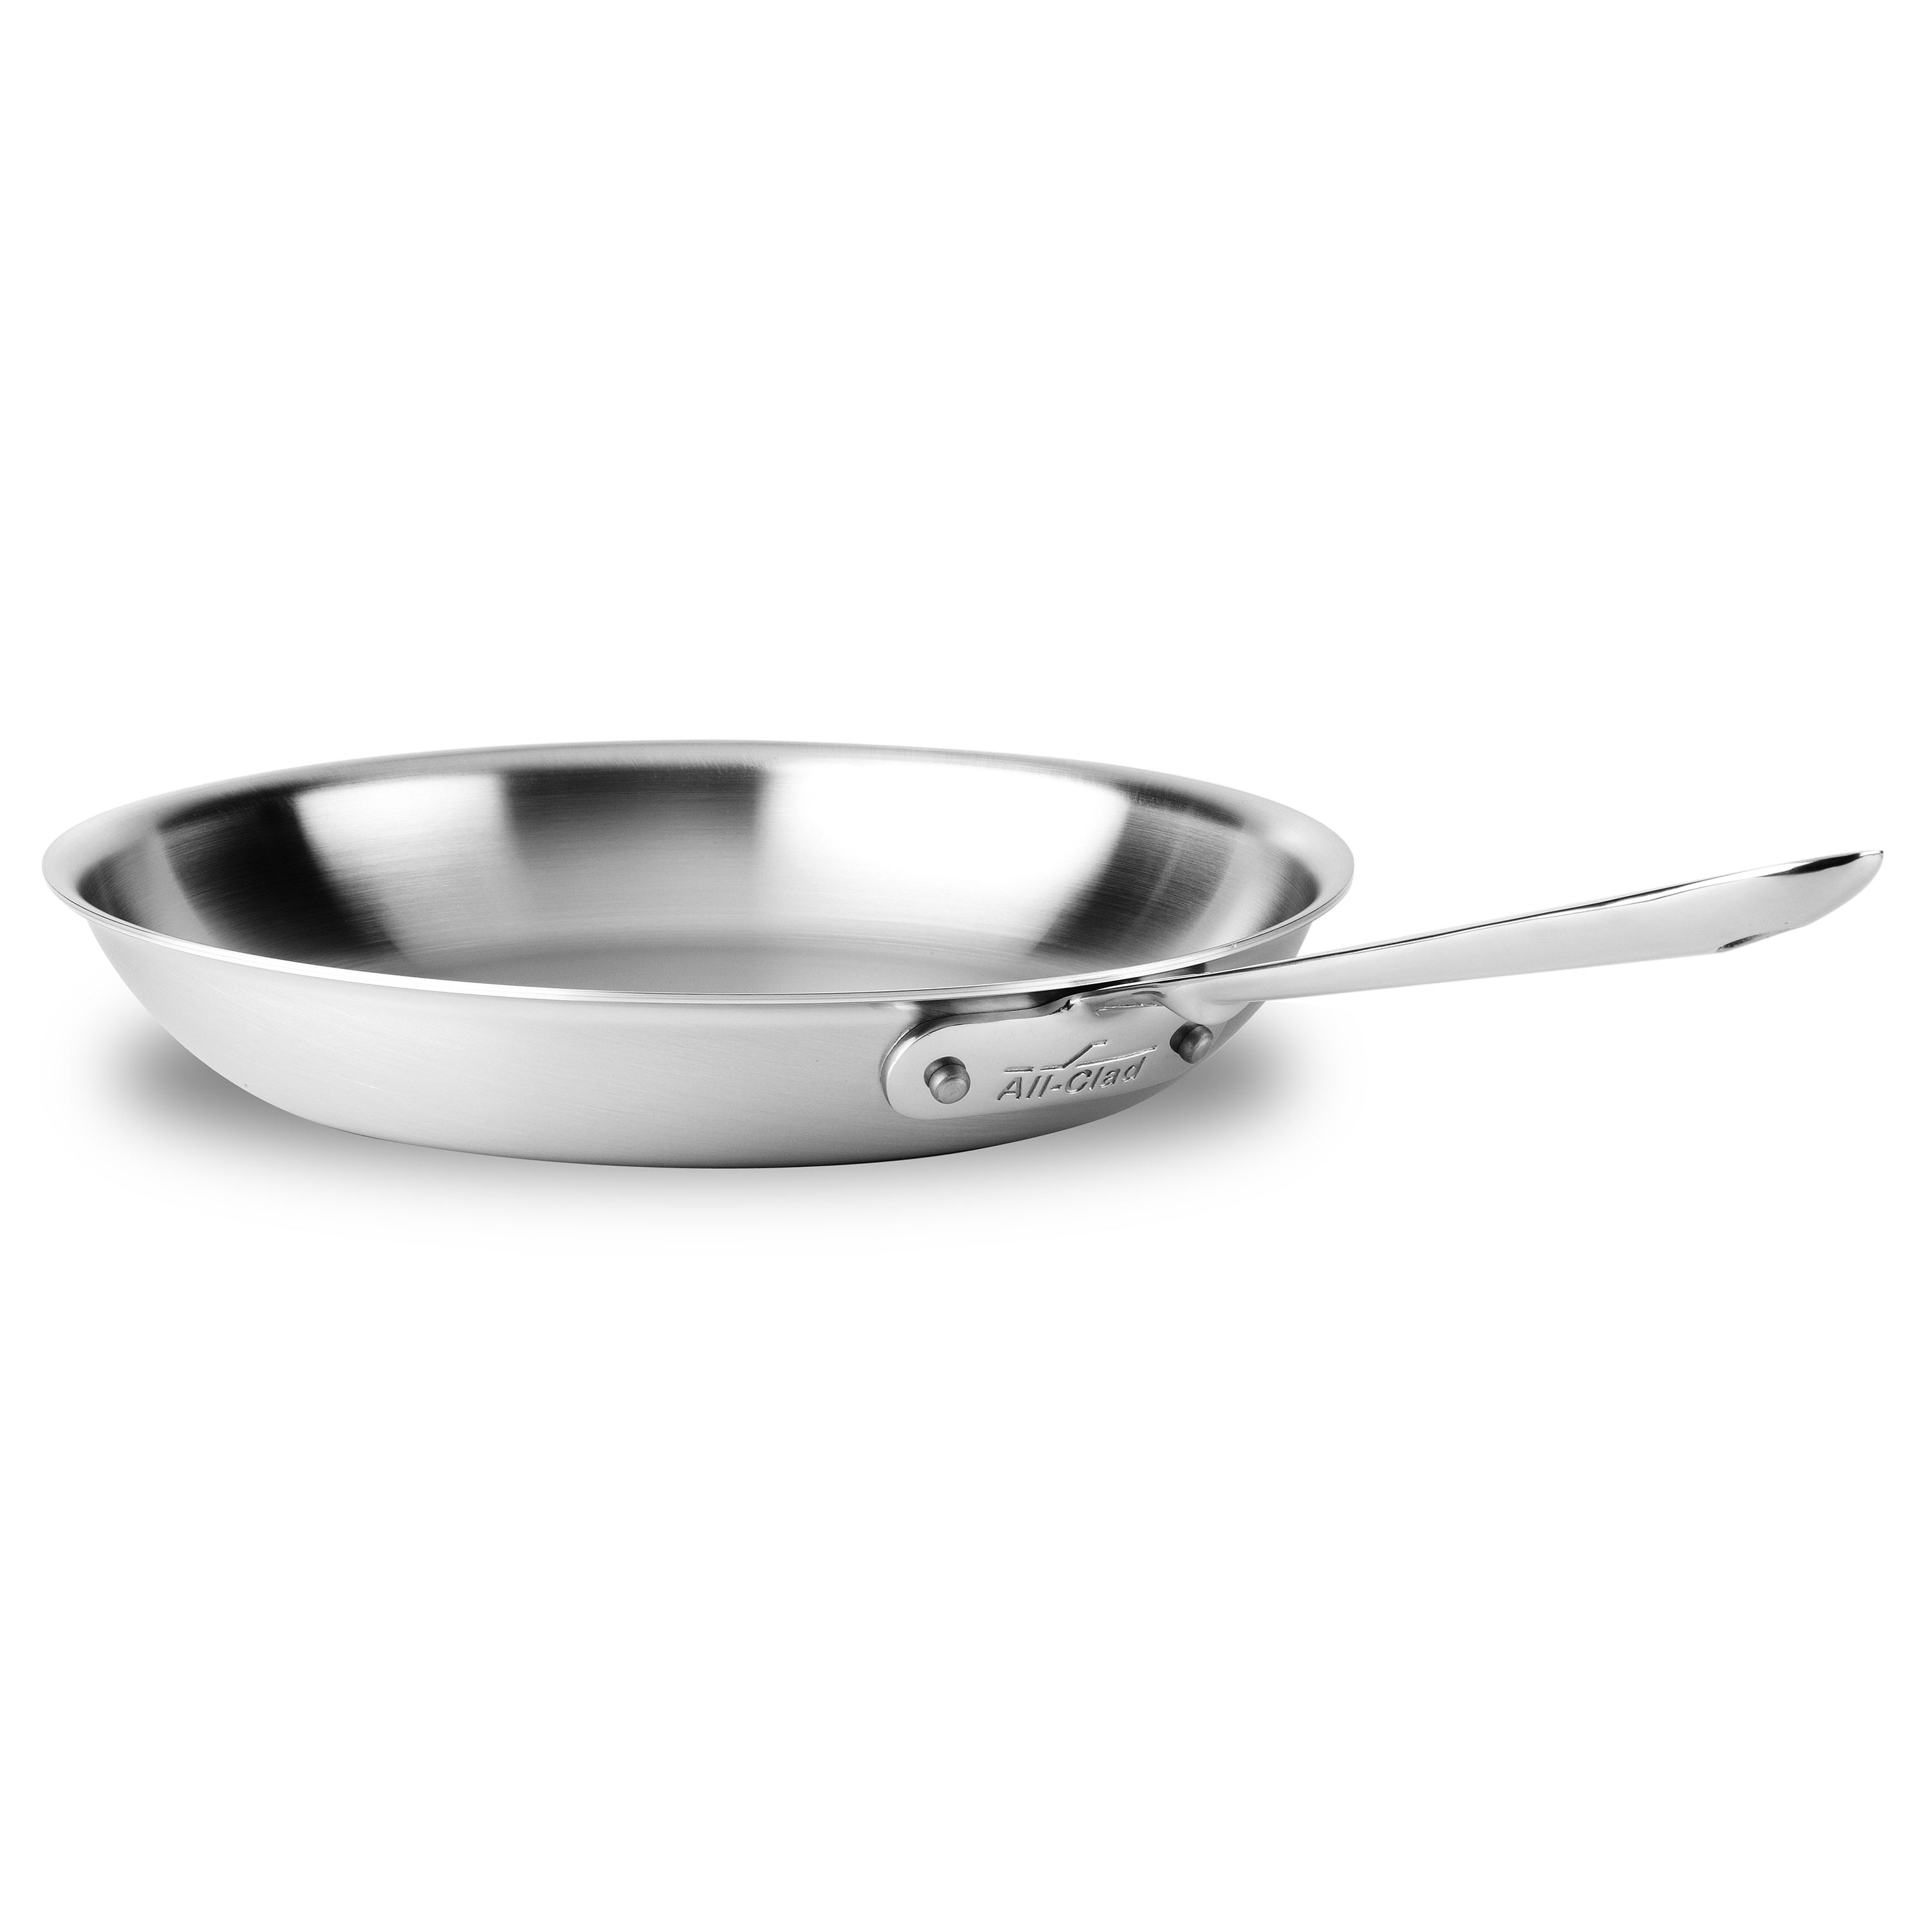 All-Clad d5 Stainless-Steel Deep Skillet - 12 1/2-Inch